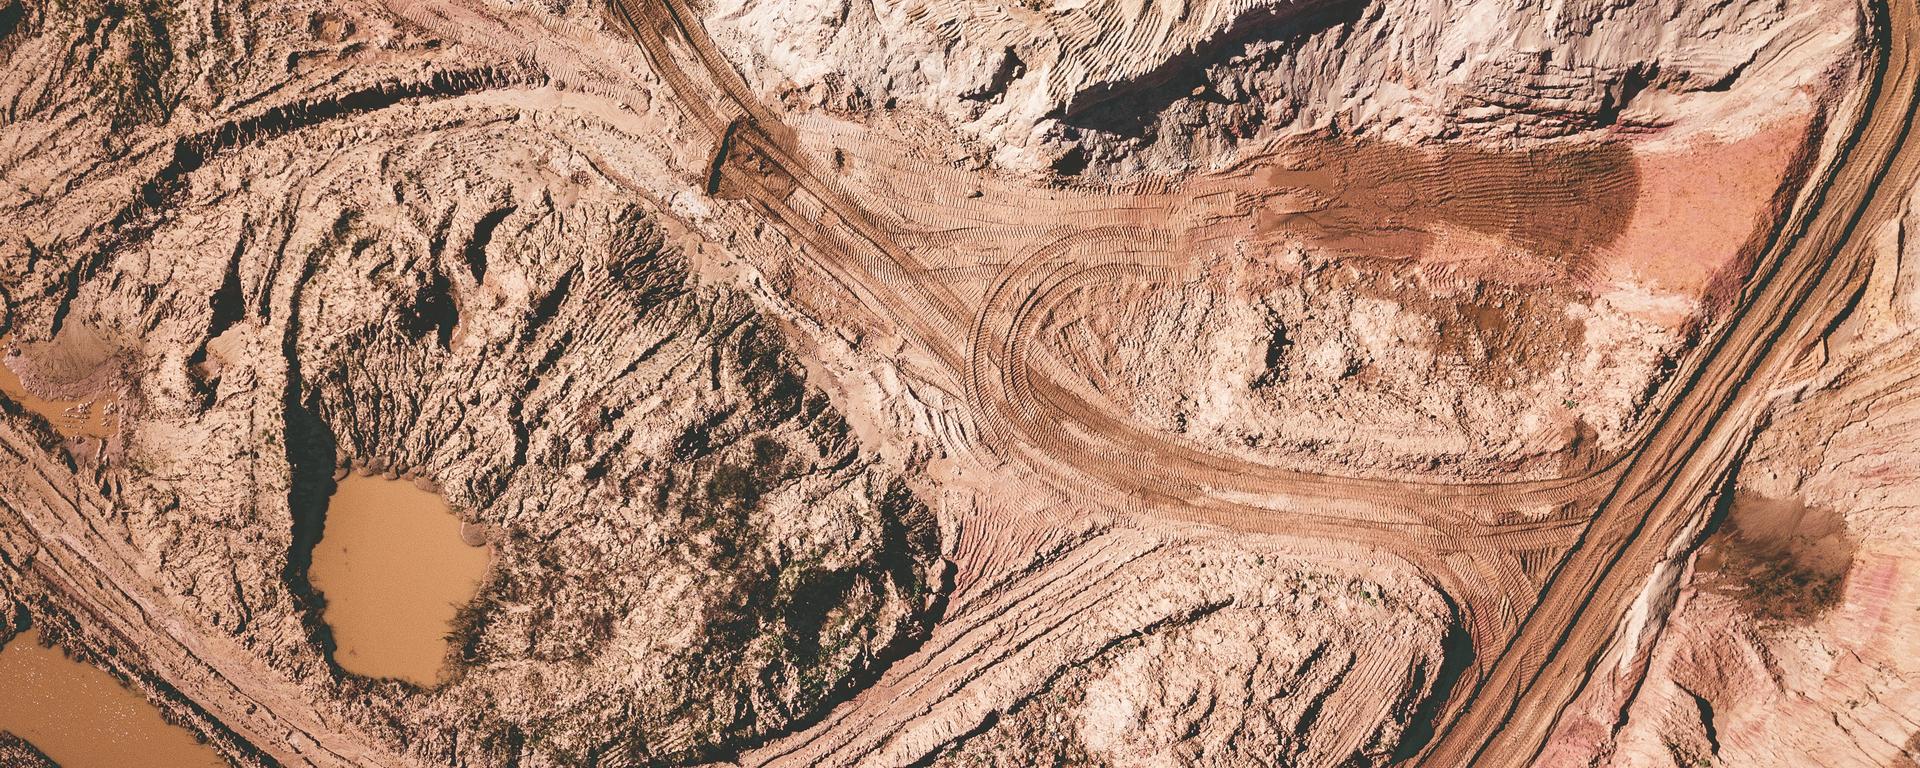 An overhead view of an open pit mine. The ground is brown and rusty-looking, and there are dirt roads leading into and out of the mining area.